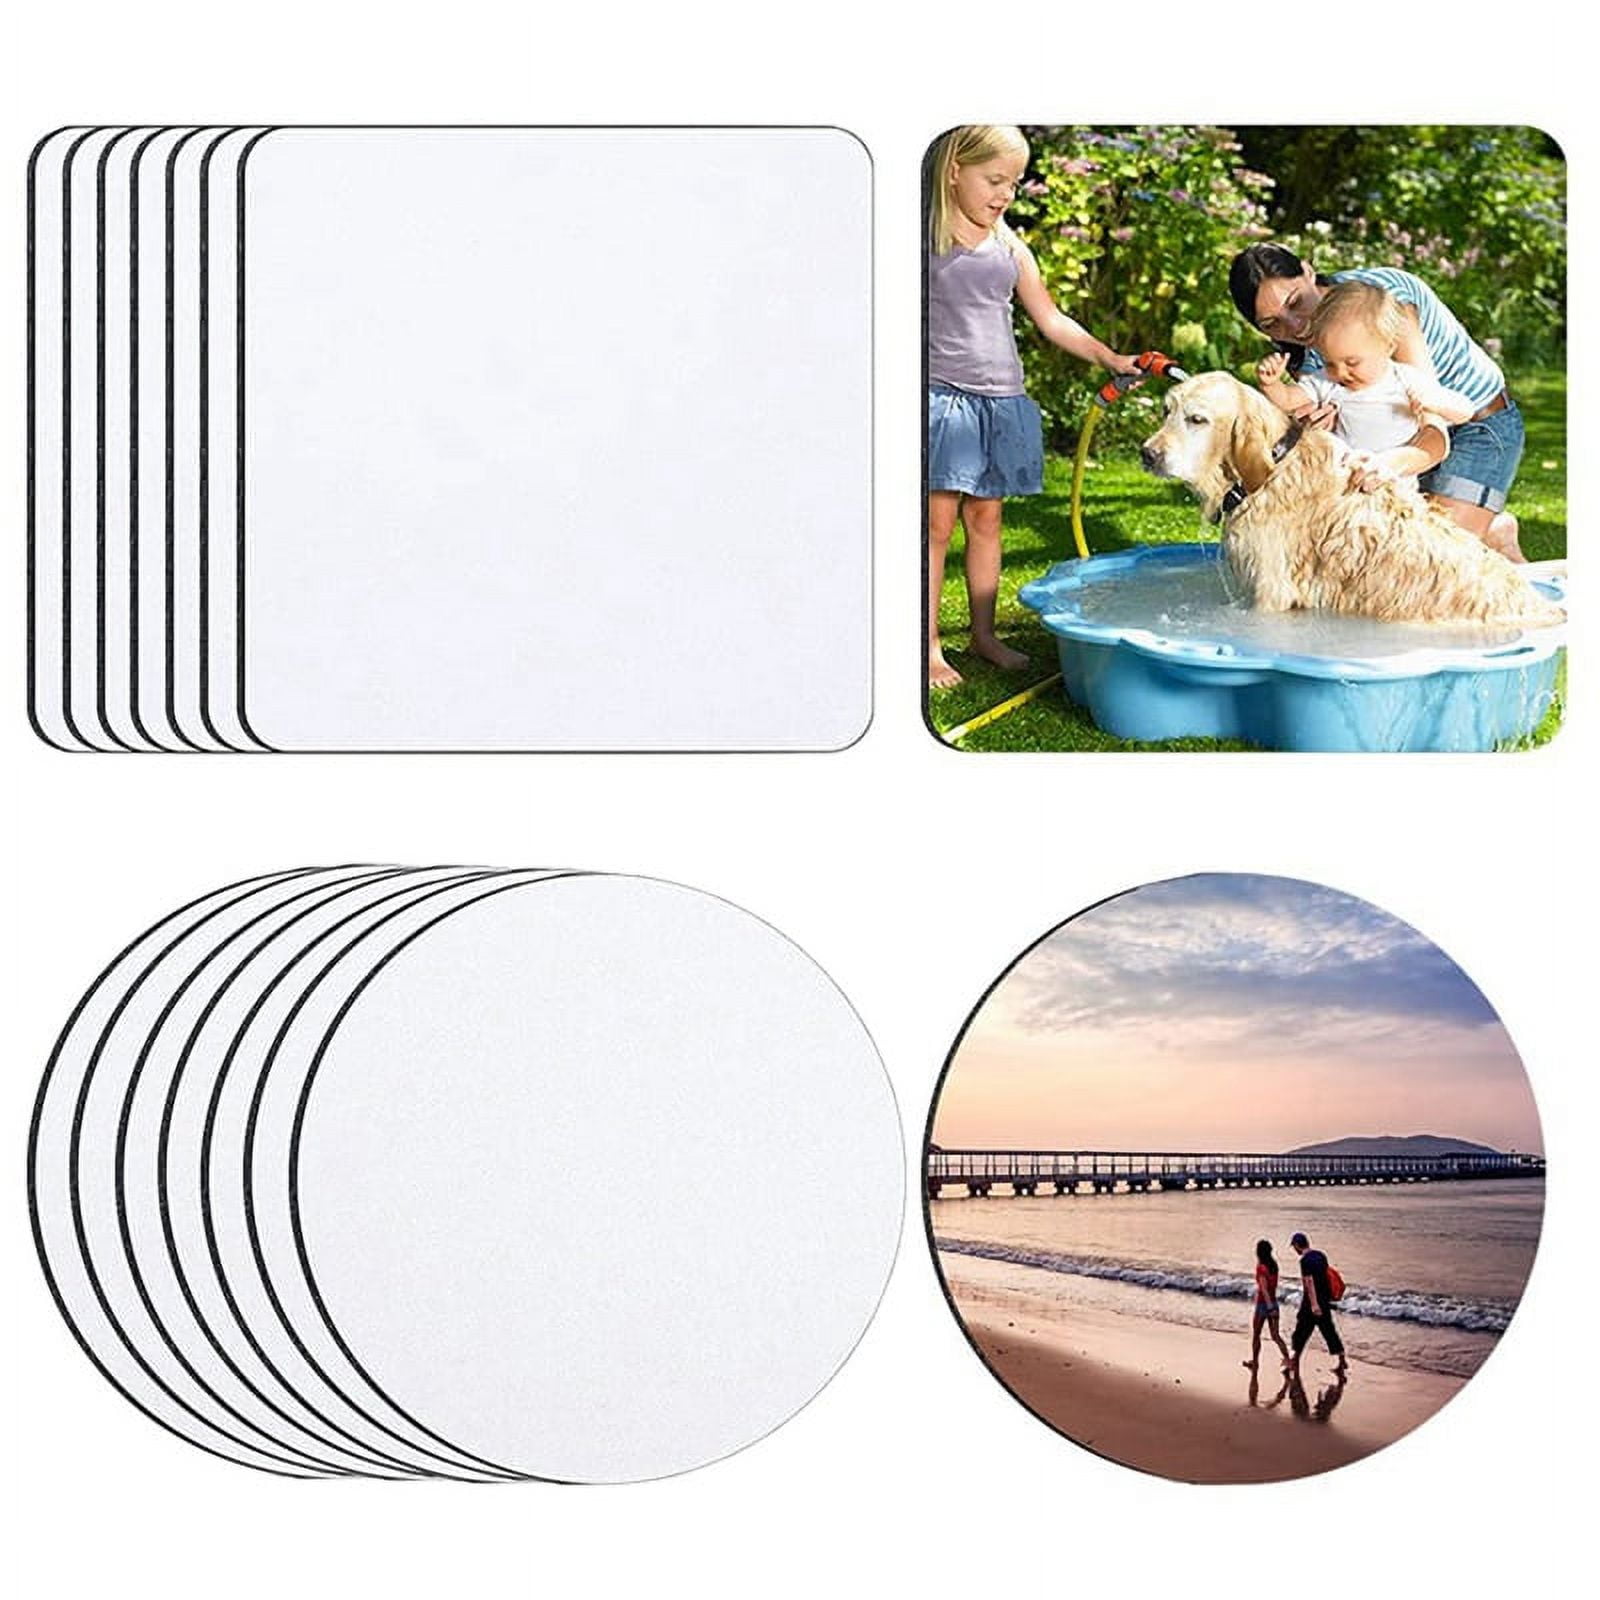 Sublimation Ceramic Car Coaster Cups Mat Pad Thermal Bumpers Blank White  Heat Transfer Absorb Water Cup Coasters Finger Notch Easy Removal Holder  From Springblue, $0.63